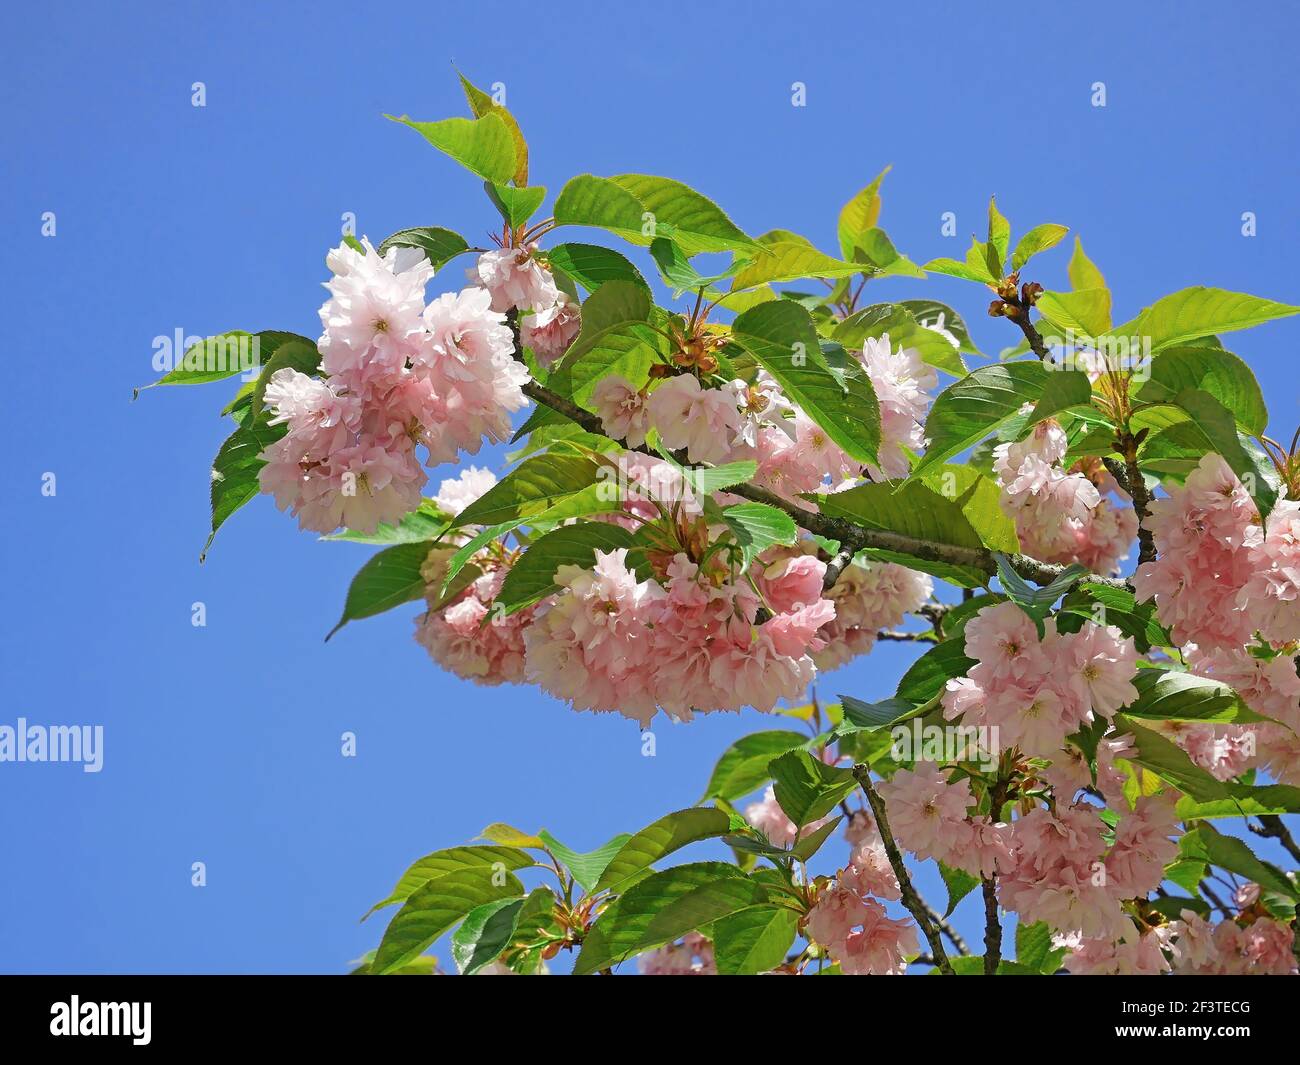 Blossom of Almond Trilobate tree, Latin name - Prunus triloba, beautiful pink flowers on branch in early May, vivid deep blue sky background, close-up Stock Photo